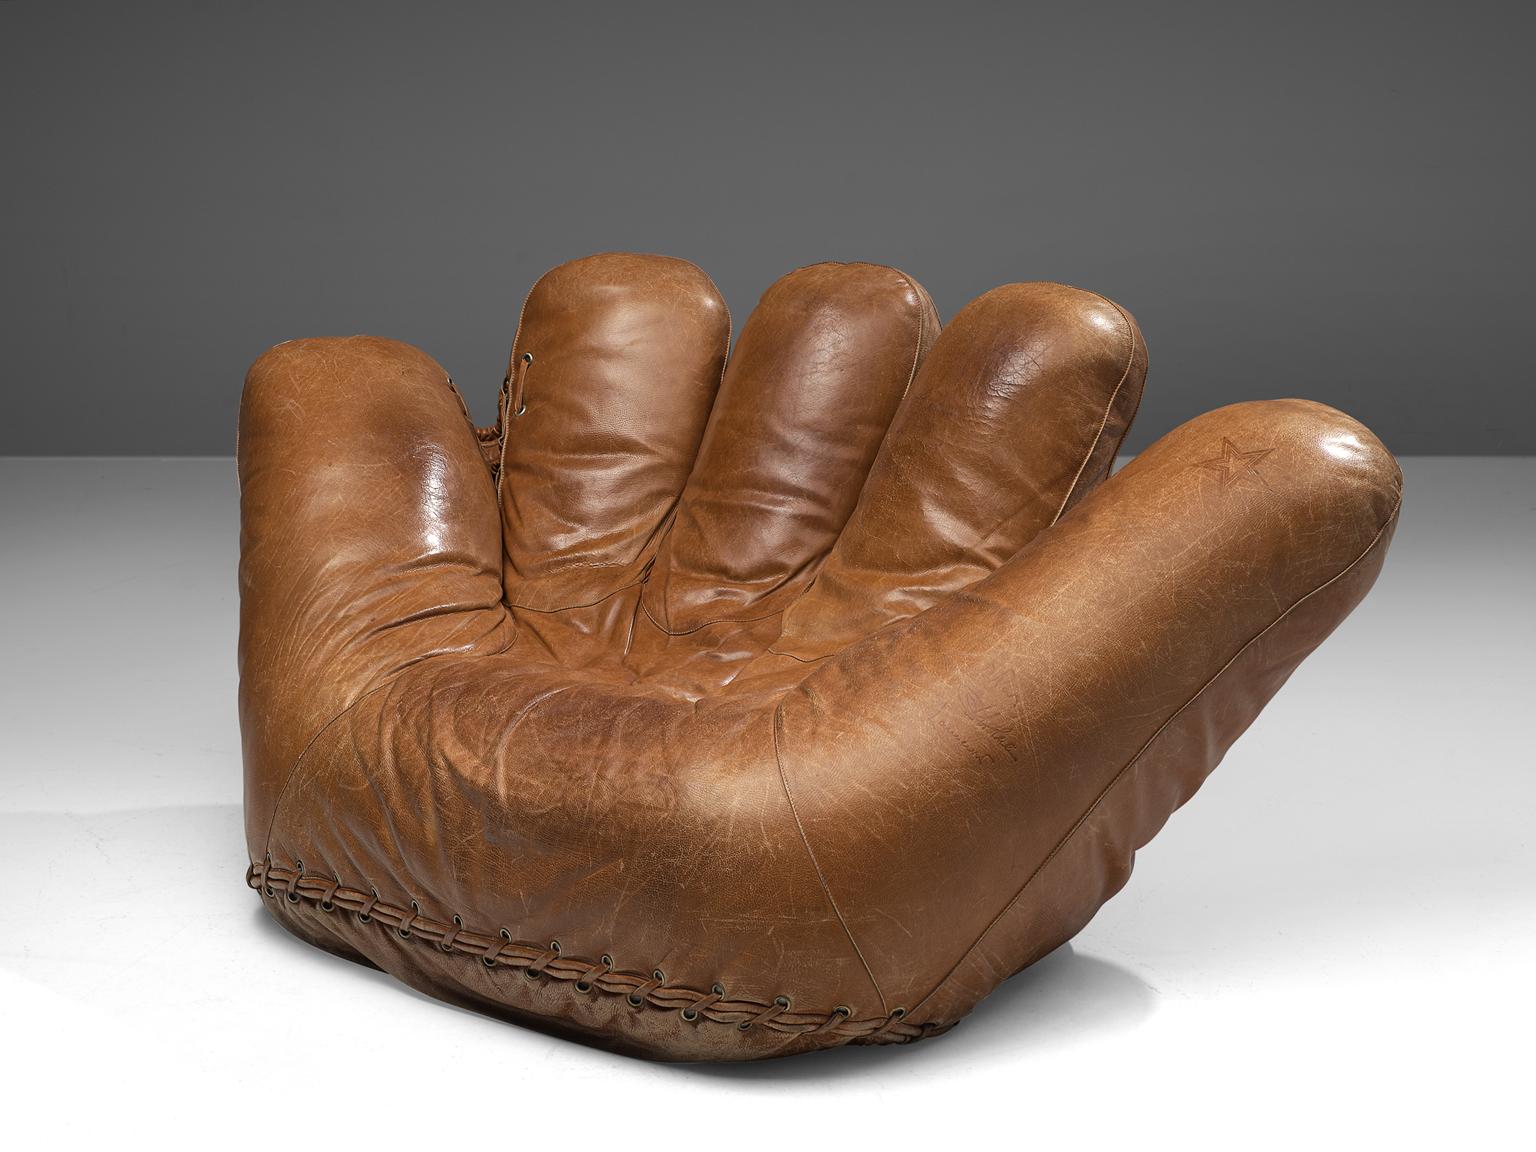 Jonathan de Pas, Donato D'urbino and Paolo Lomazzi for Poltronova, 'Joe' chair, cognac leather, Italy, 1970s.

'A chair that fits like a glove'. This extraordinary chair is named the 'Joe Seat' and was dedicated to the legendary baseball champion,